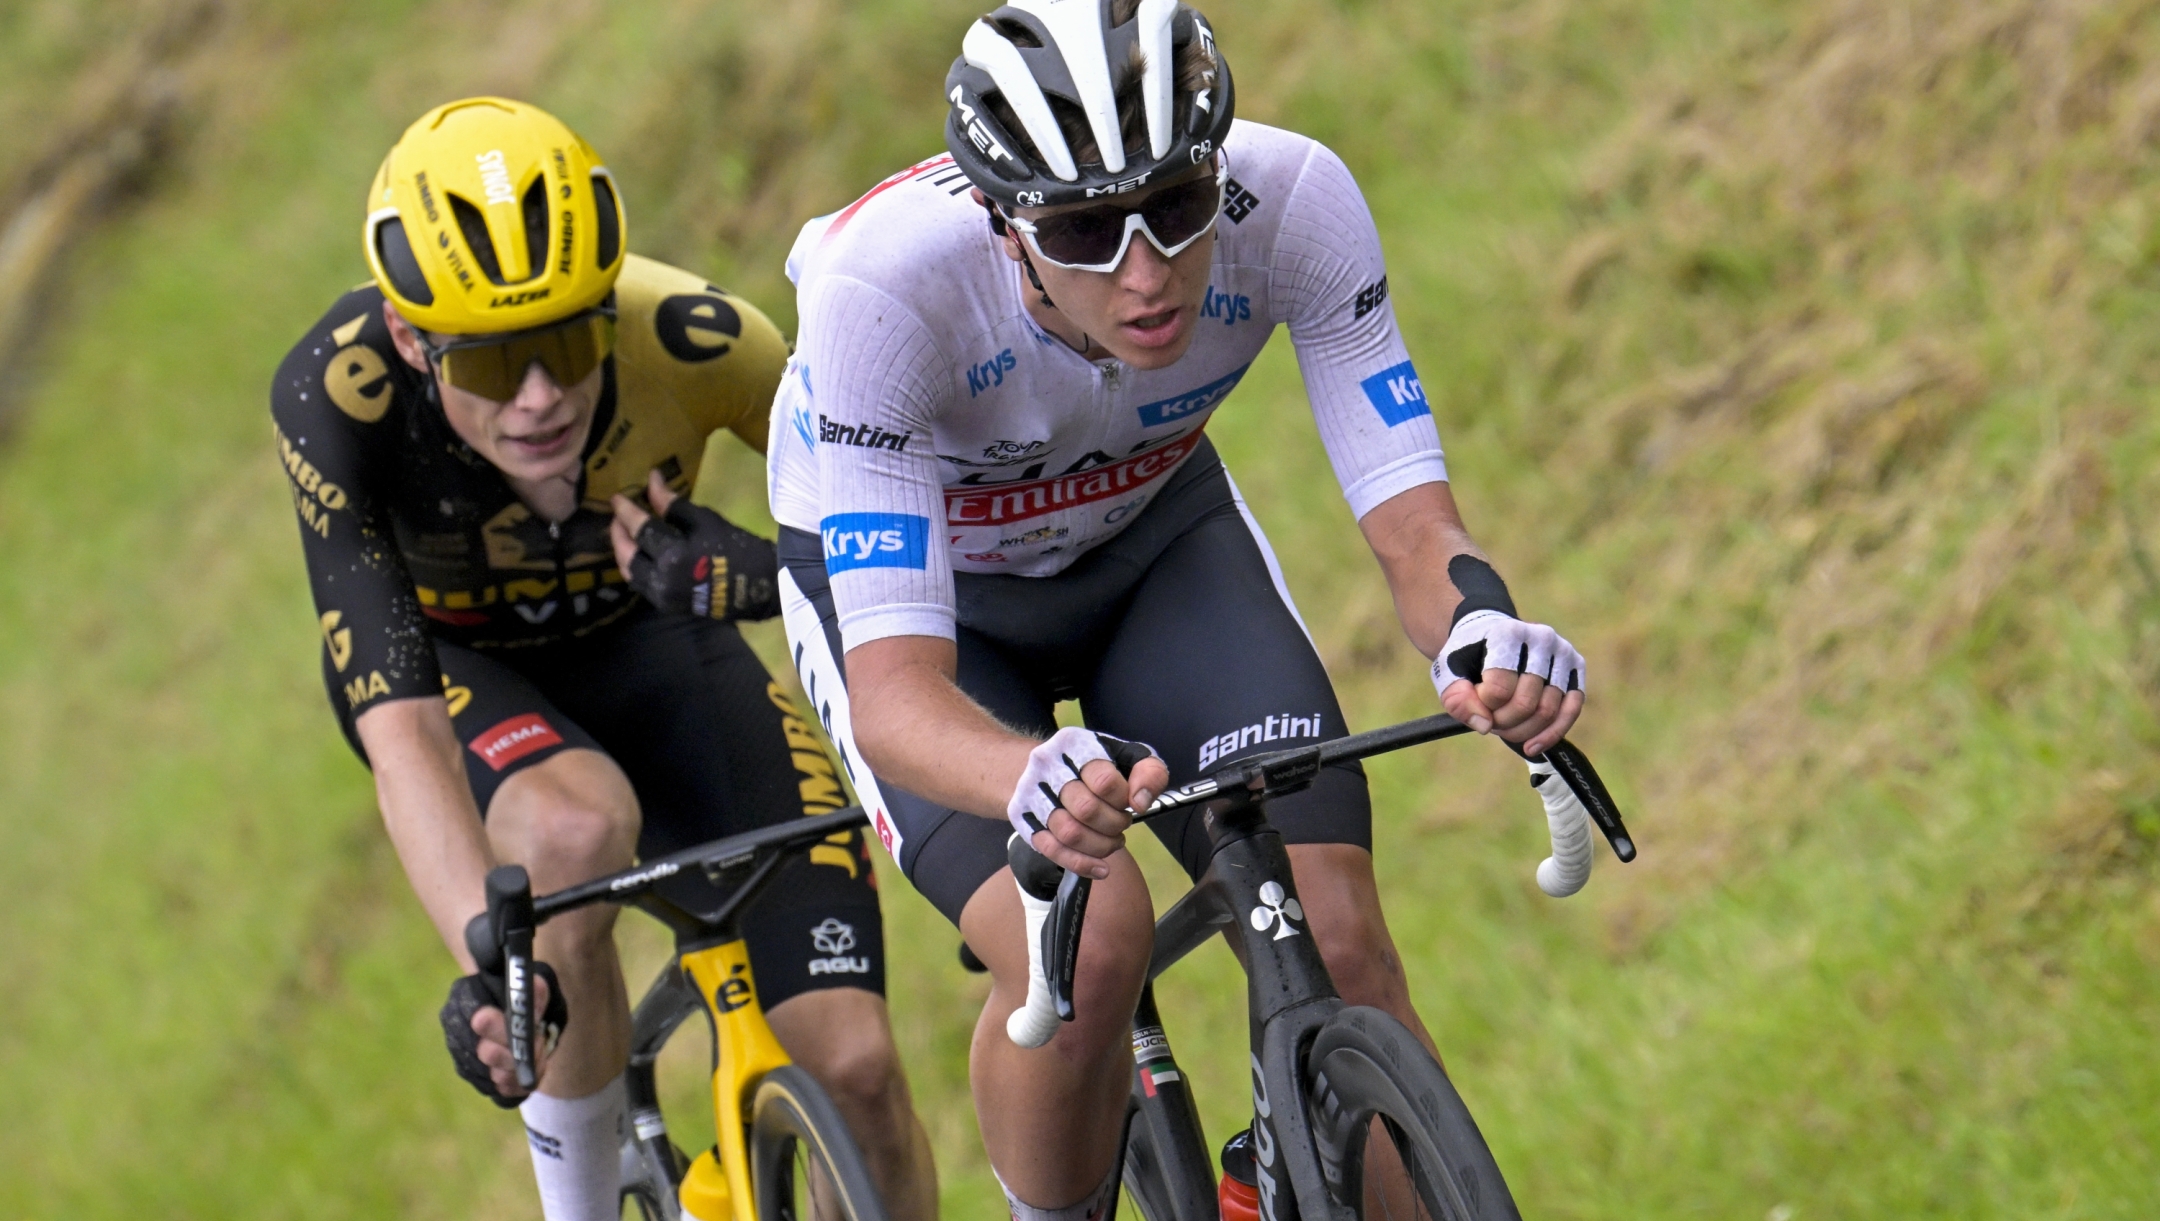 Denmark's Jonas Vingegaard, left, follows Slovenia's Tadej Pogacar, wearing the best young rider's white jersey, during the second stage of the Tour de France cycling race over 209 kilometers (130 miles) with start in Vitoria-Gasteiz and finish in San Sebastian, Spain, Sunday, July 2, 2023. (Bernard Papon/Pool Photo via AP)